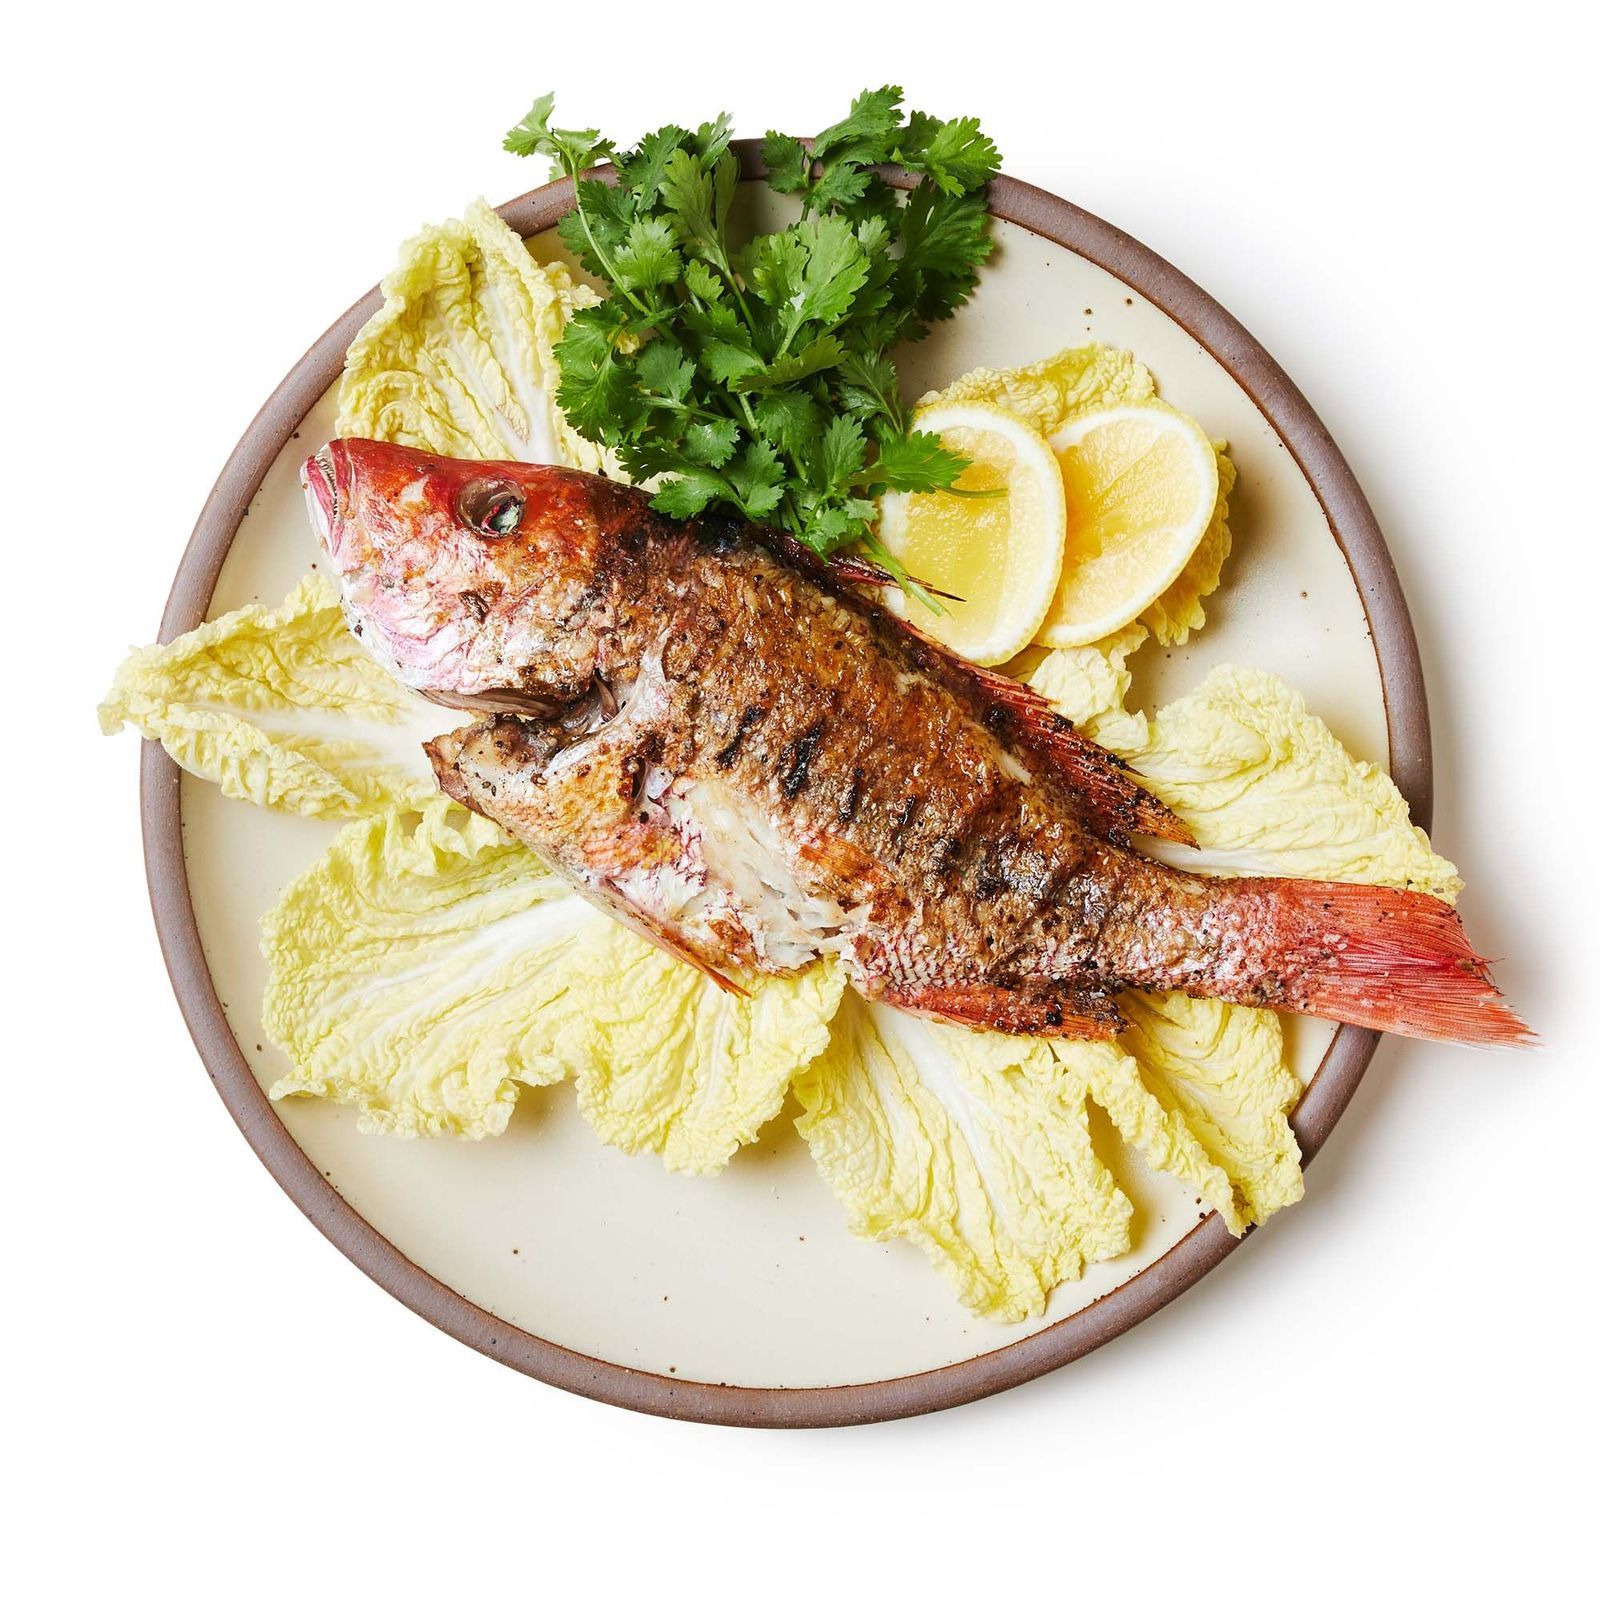 A large off-white plate with an artful display of smoked fish on a bed of lettuce, cilantro and lemon wedges